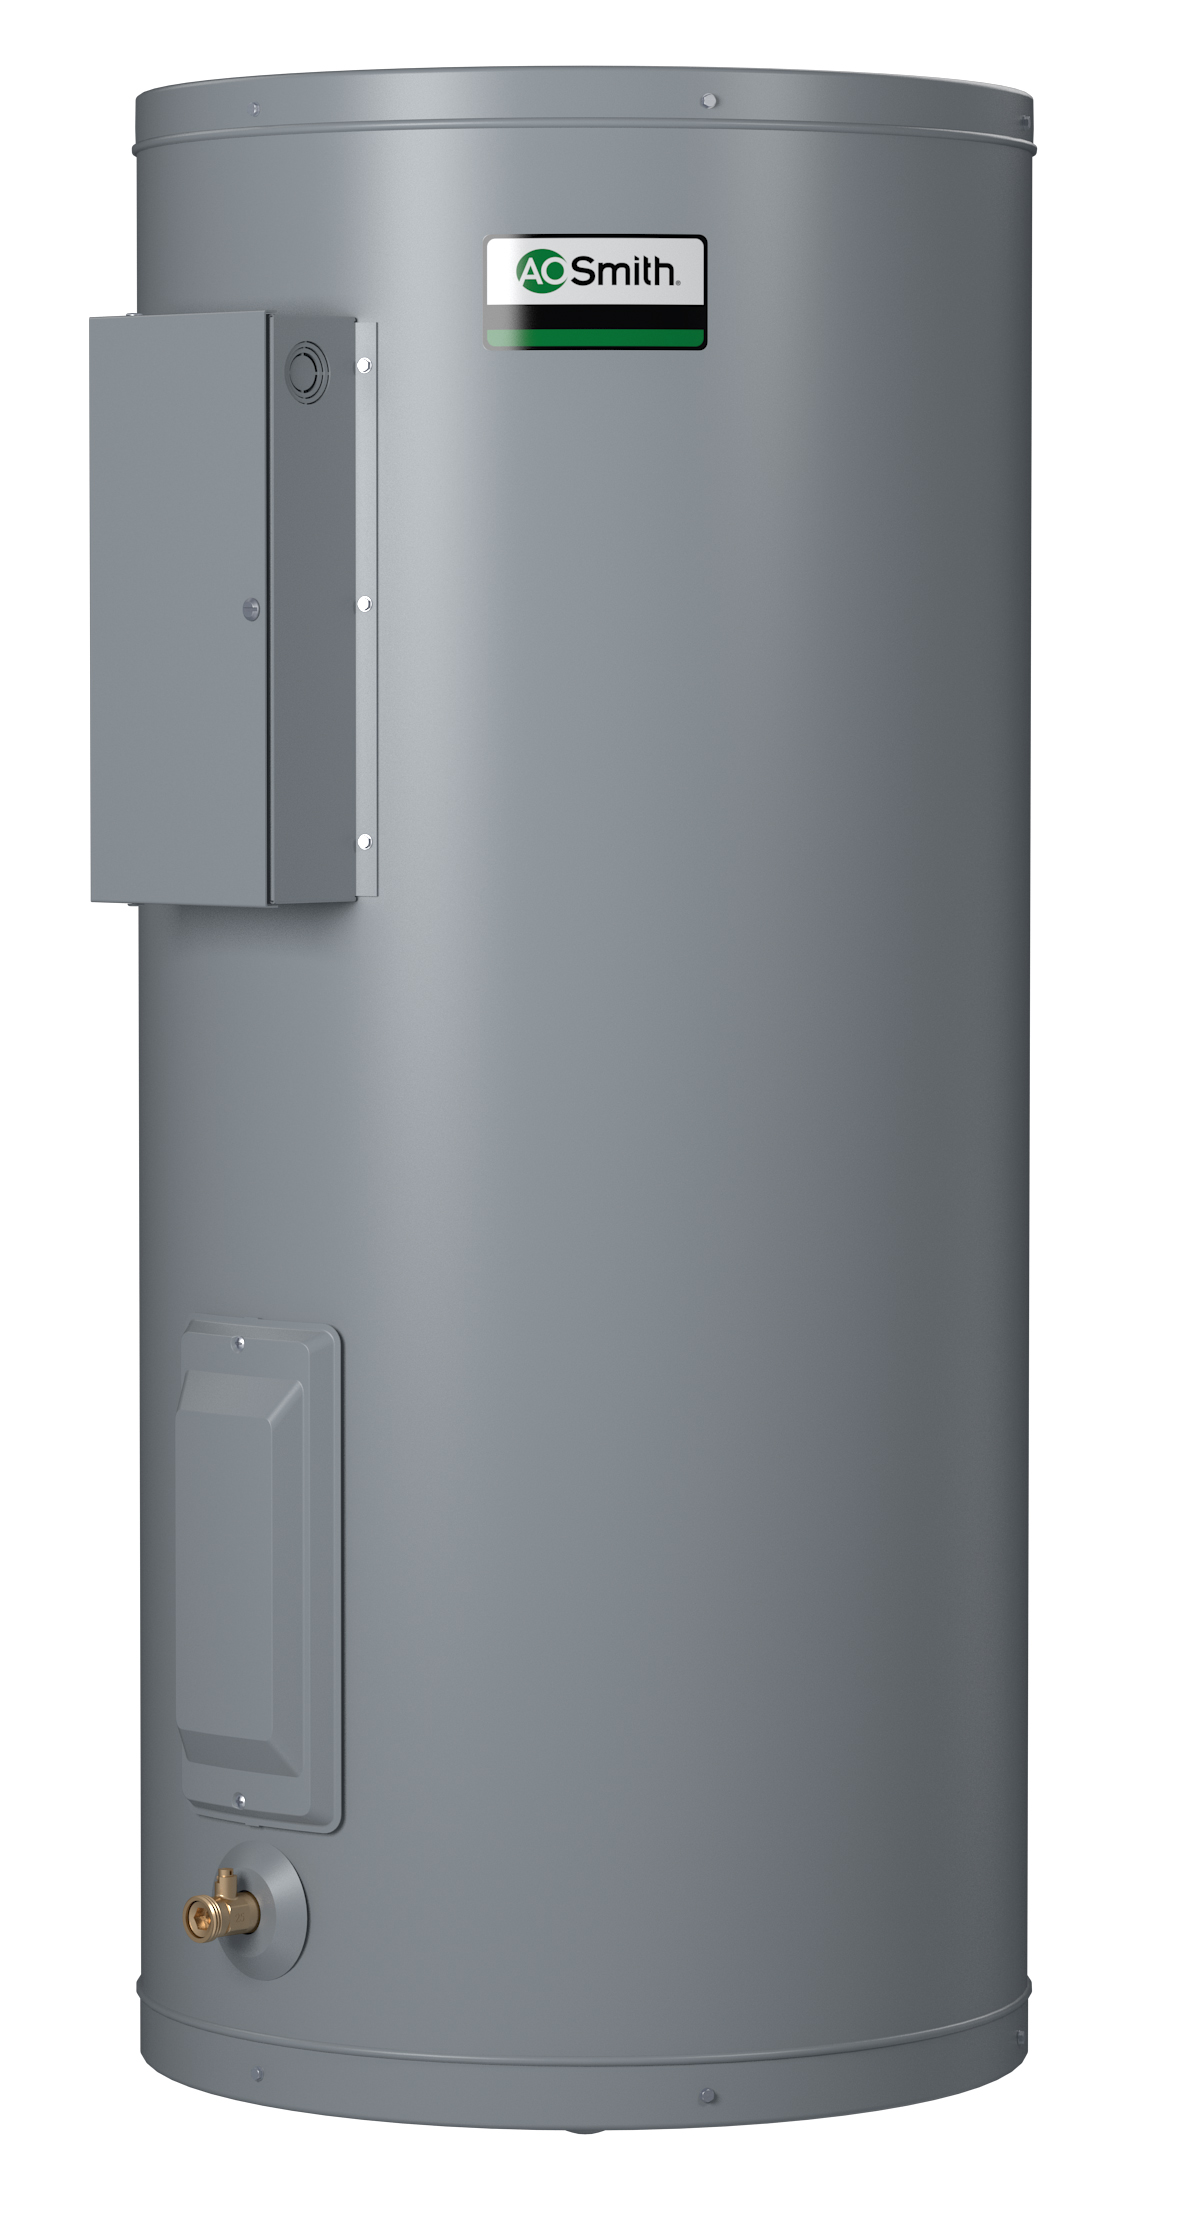 AO SMITH DEN-80D: 80 GALLONS, 9.0KW, 240 VOLT, 1 PHASE, (2-4500 WATT ELEMENTS, SIMULTANEOUS WIRING), DURA-POWER, LIGHT DUTY COMMERCIAL ELECTRIC WATER HEATER